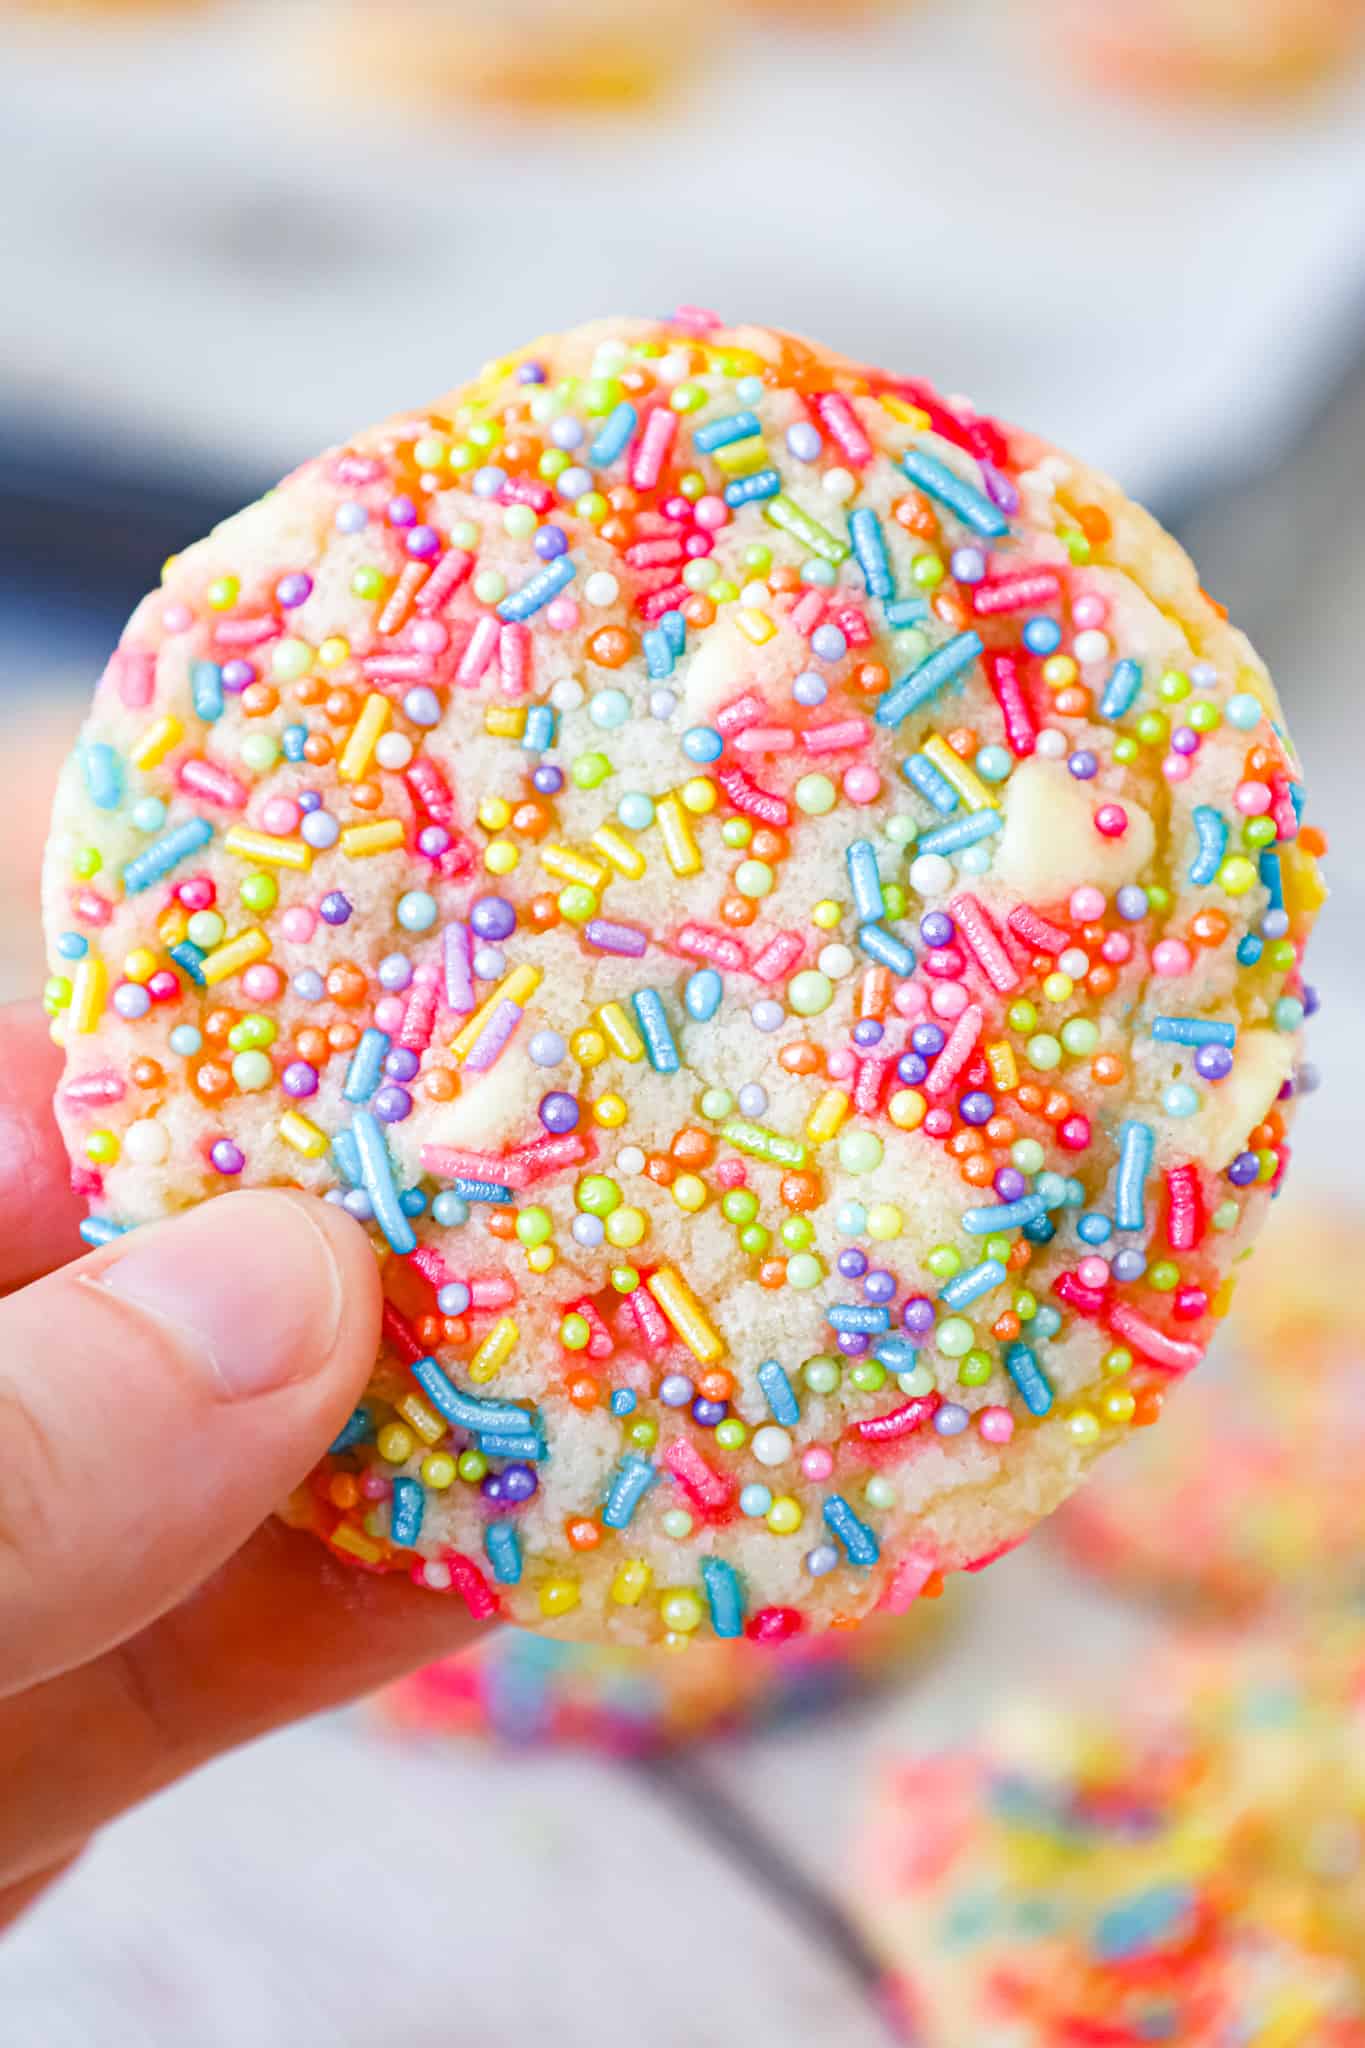 Funfetti Cookies are delicious soft and chewy cookies loaded with white chocolate chips and tons of colourful sprinkles.